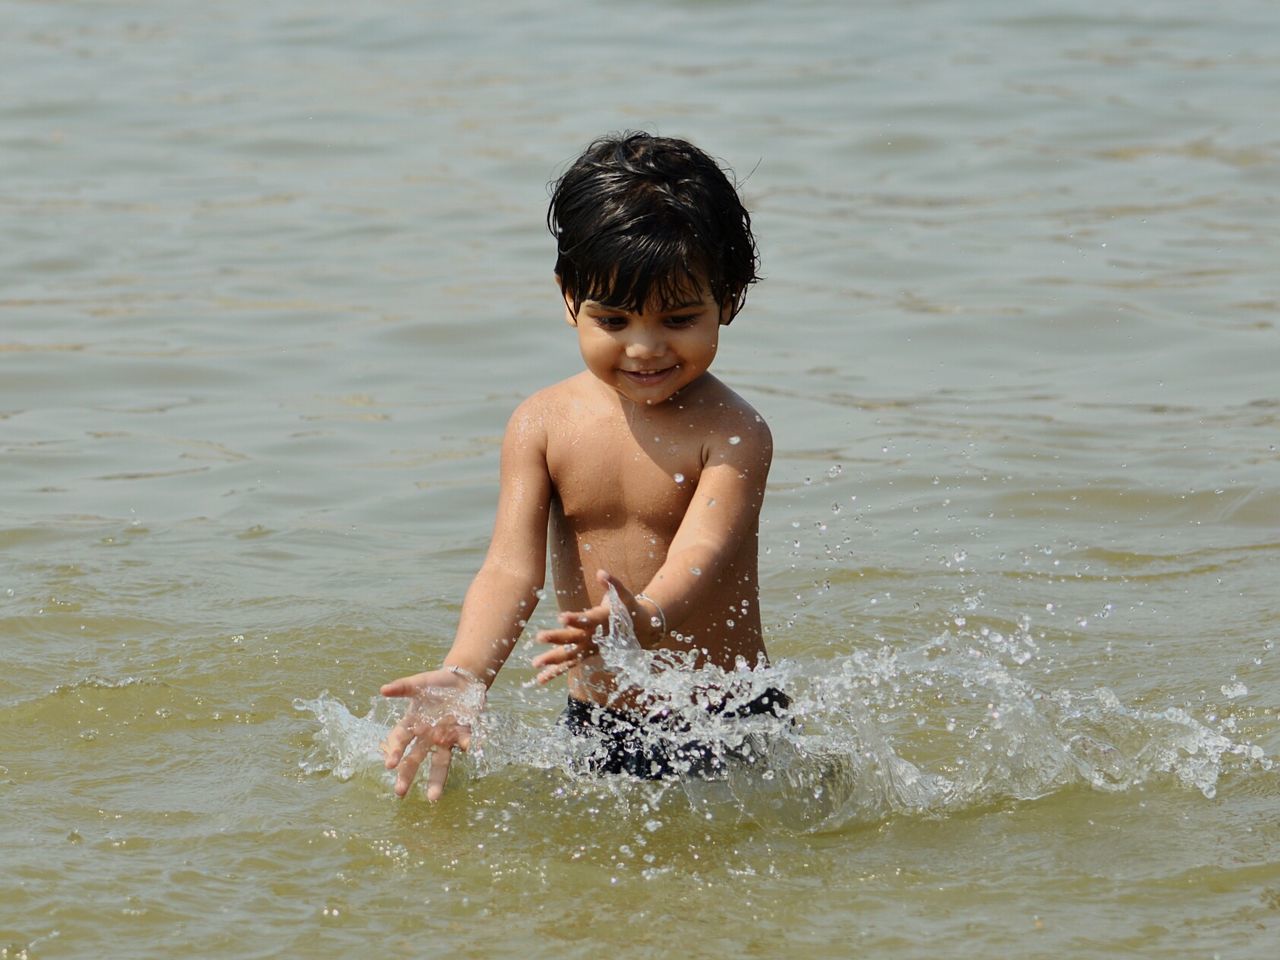 Playful child in the sea